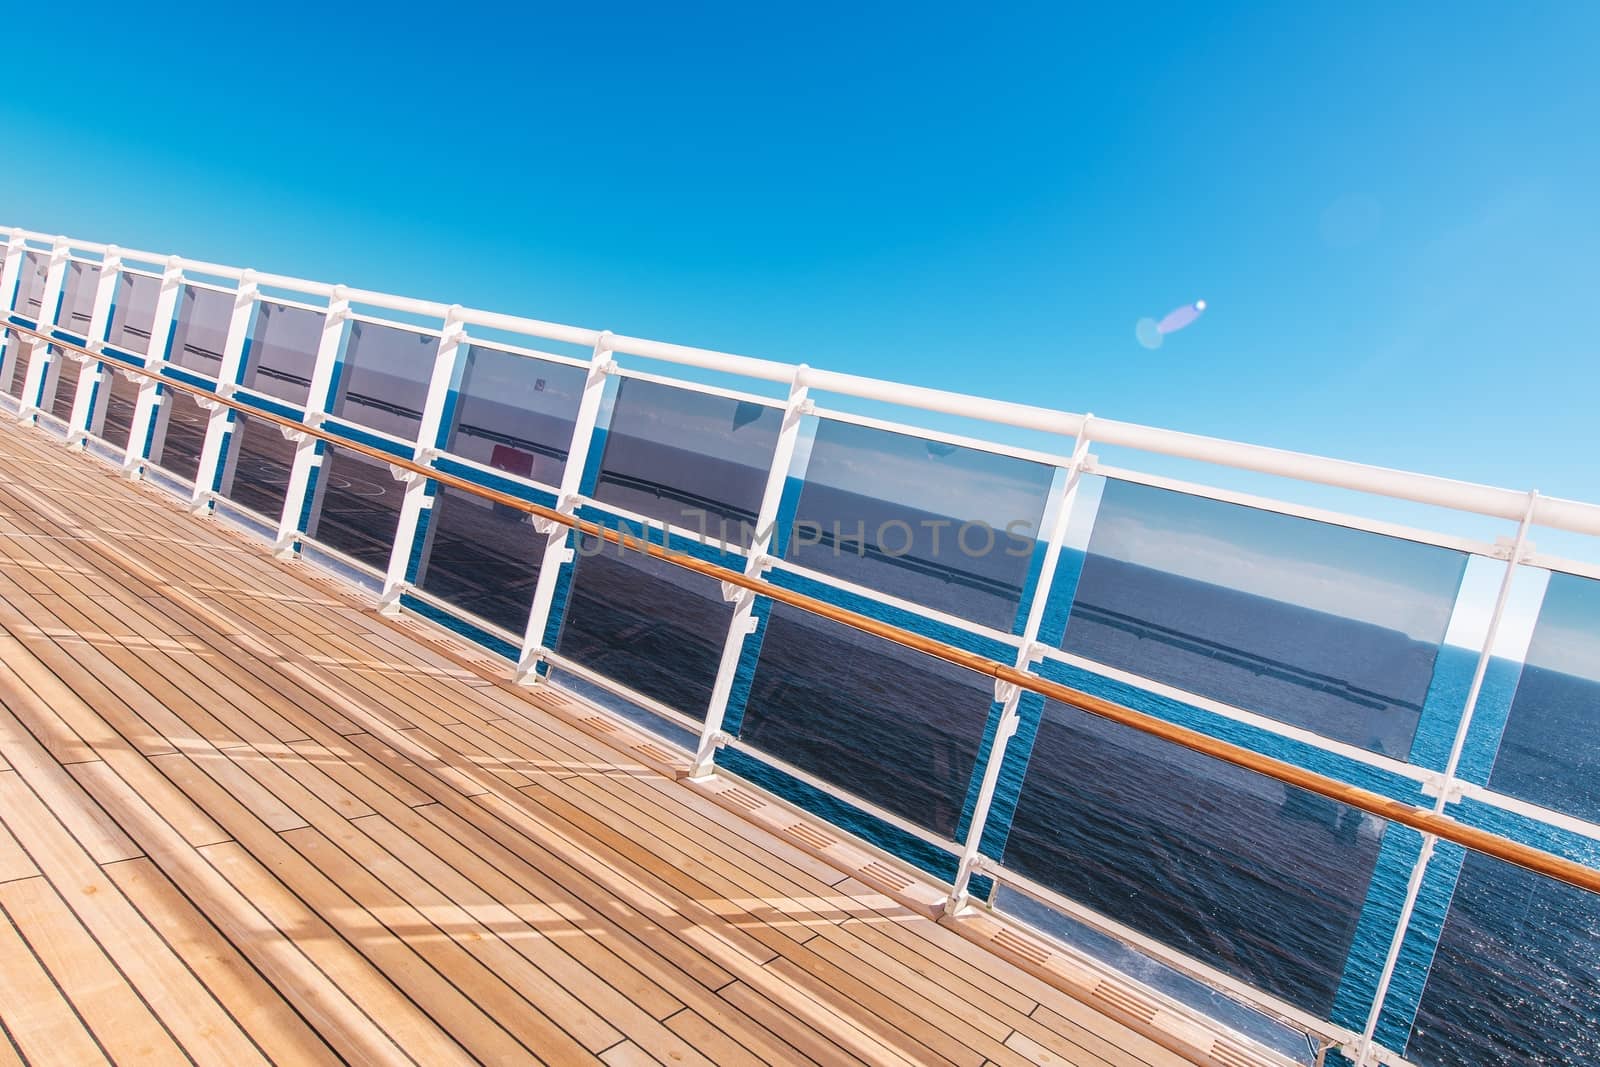 Cruise Ship Vacation Theme. Wooden Deck of the Cruise Vessel with Glassy Barriers and the Ocean Vista. Caribbean Vacation Time.